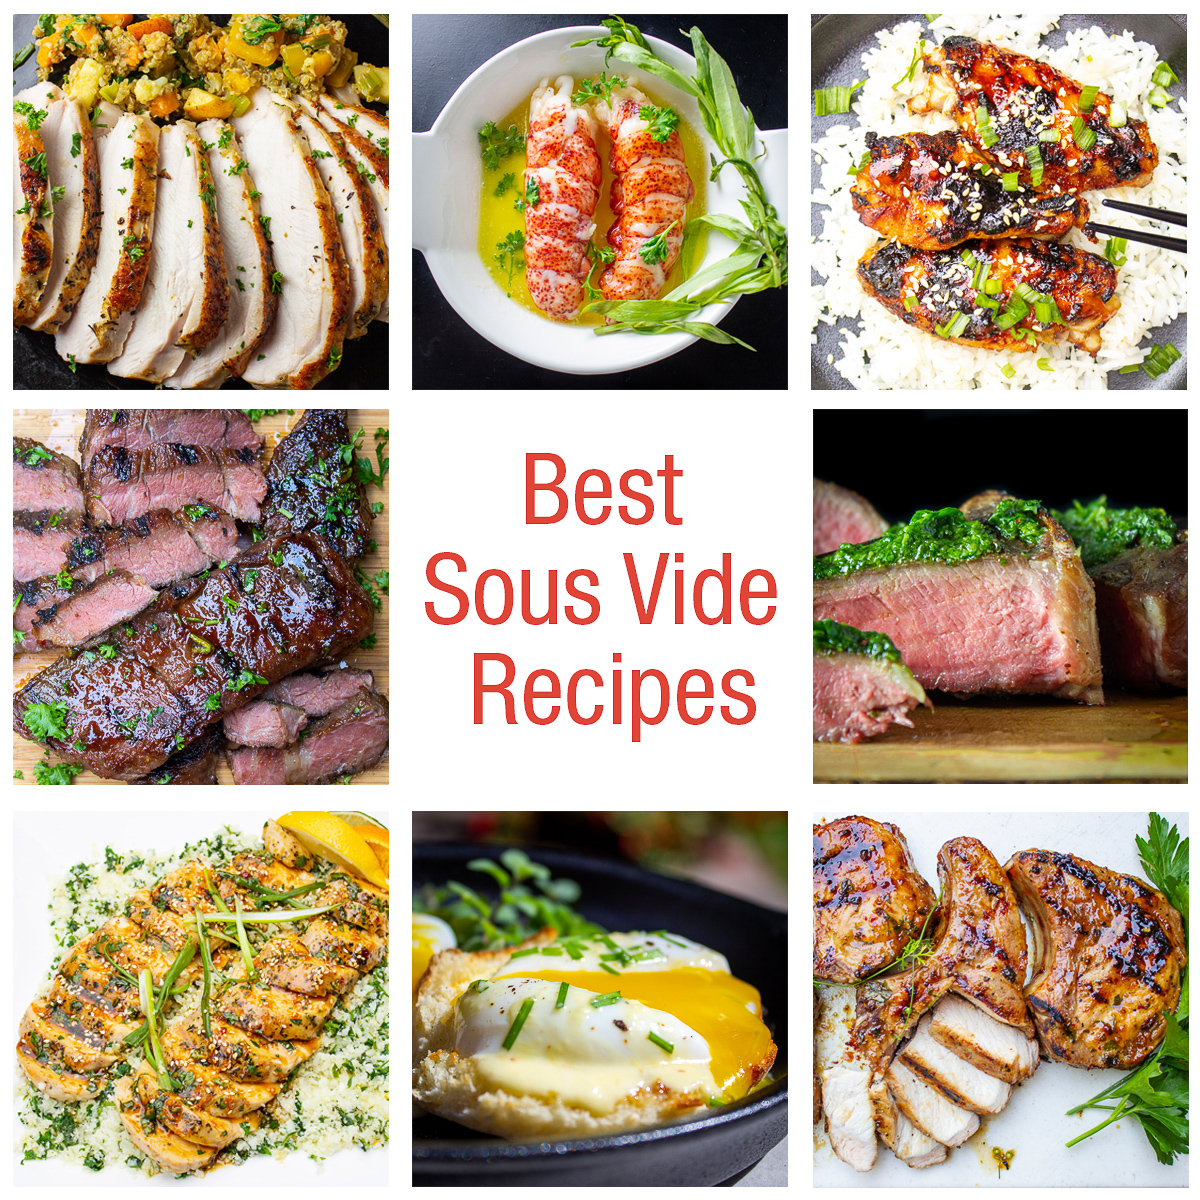 29 Best Sous Vide Recipes (with beginner tips)